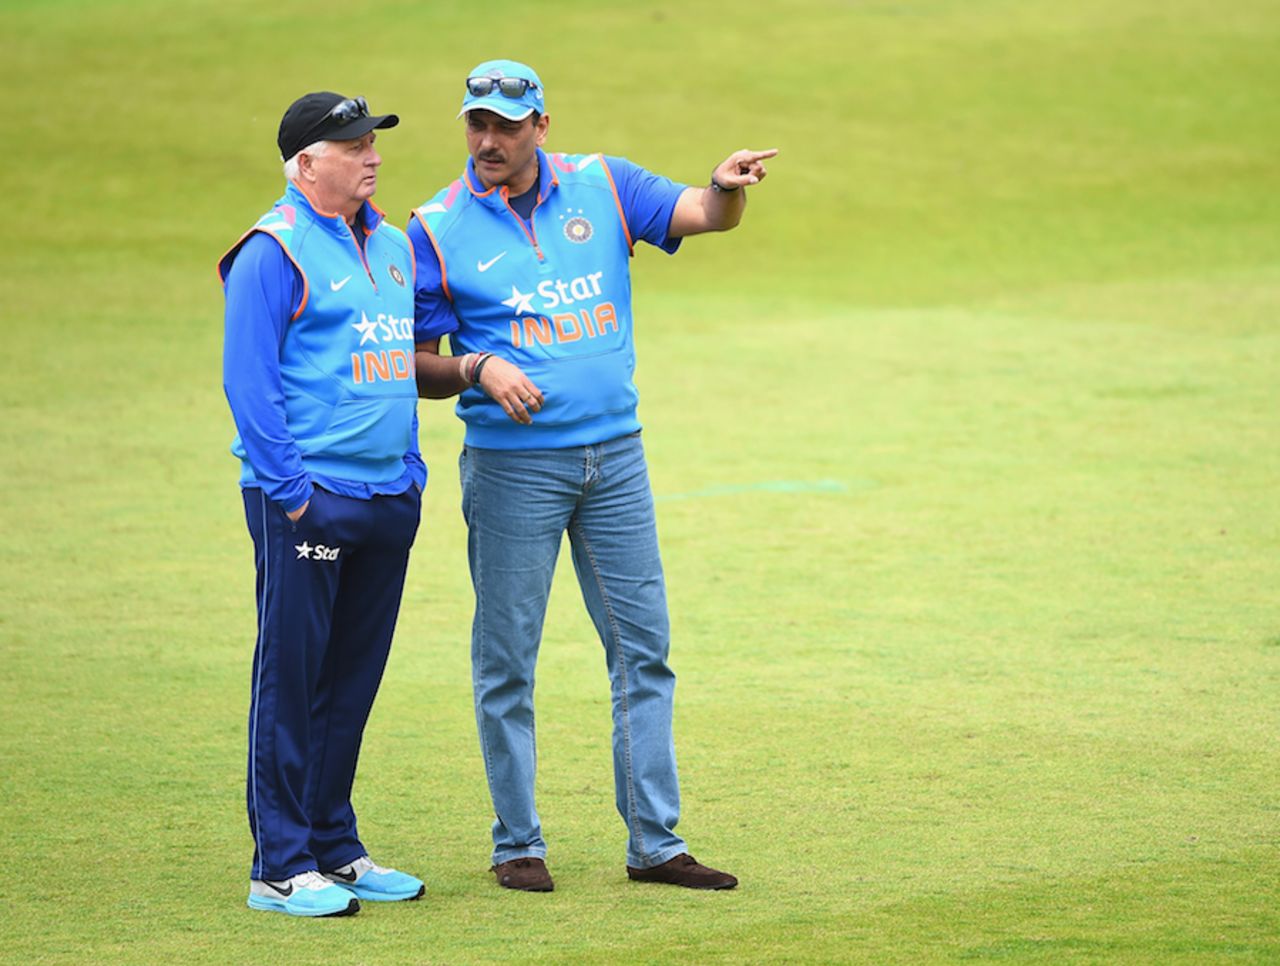 Ravi Shastri shares his thoughts with Duncan Fletcher, Trent Bridge, August 29, 2014